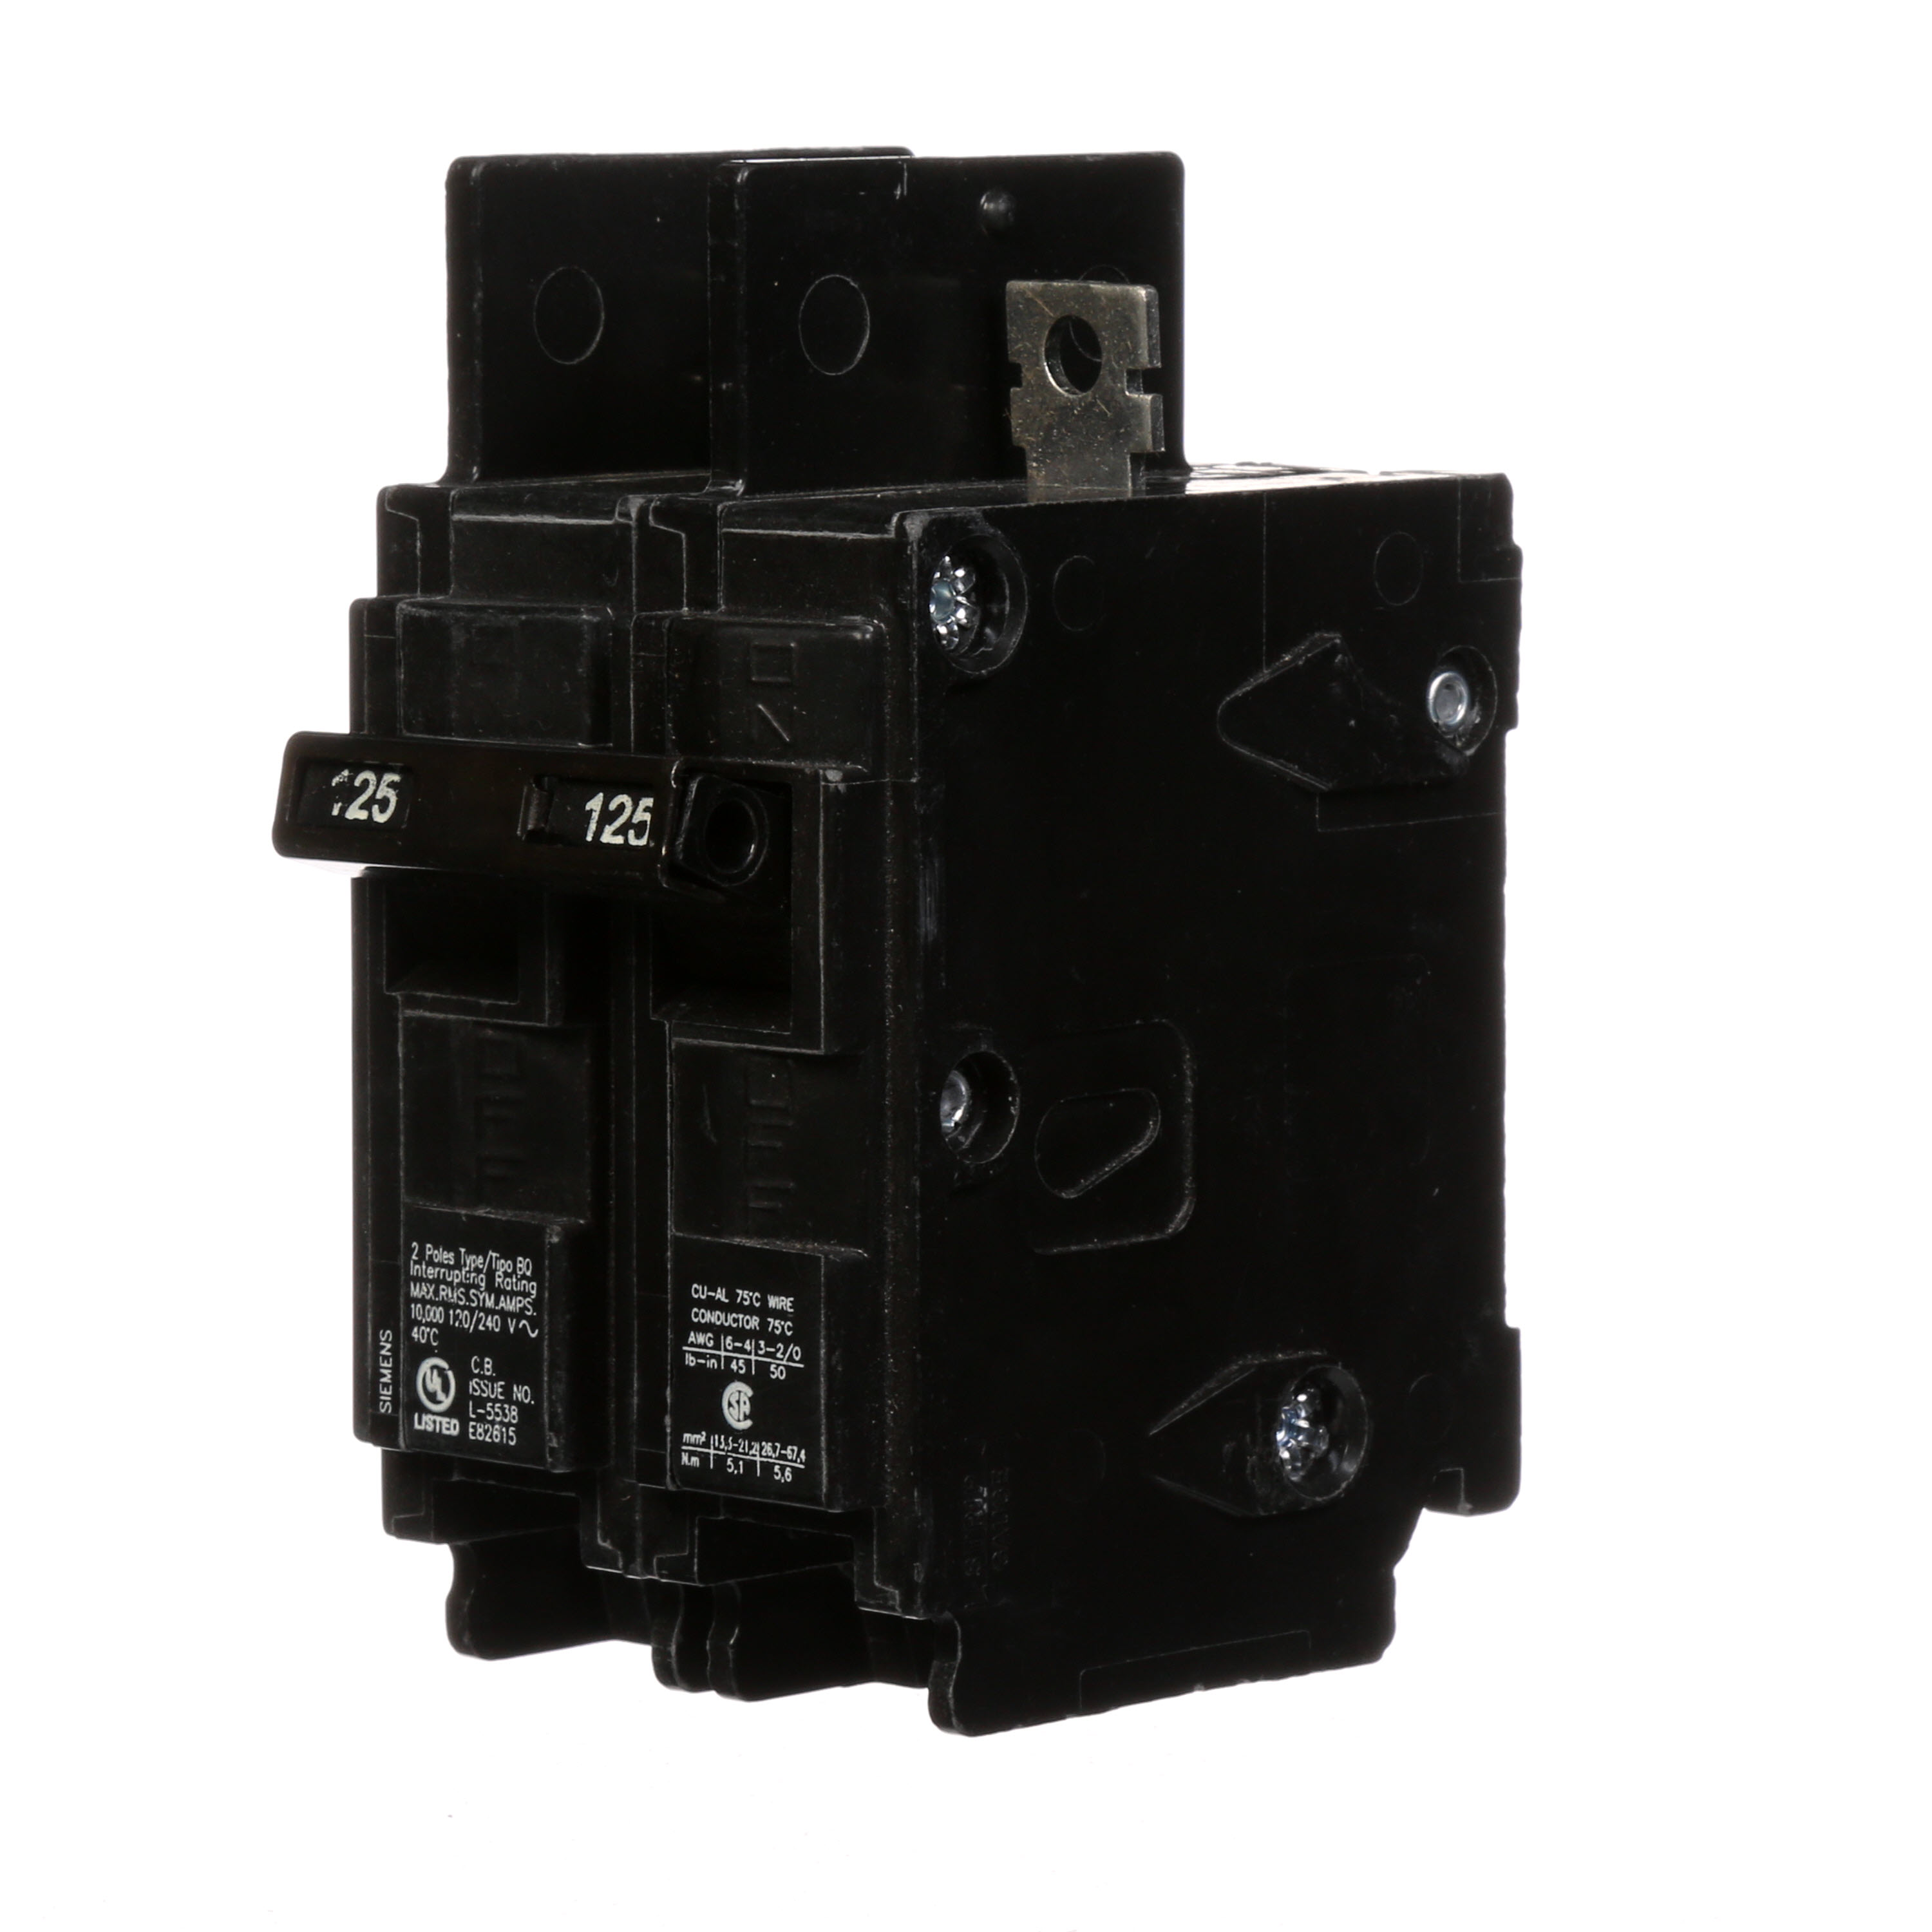 Siemens Low Voltage Molded Case Circuit Breakers General Purpose MCCBs - Type BQ, 2-Pole, 120/240VAC are Circuit Protection Molded Case Circuit Breakers. 2-Pole Common-Trip circuit breaker type BQ. Rated 120/240V (125A) (AIR 10 kA). Special features Load side lugs are included.